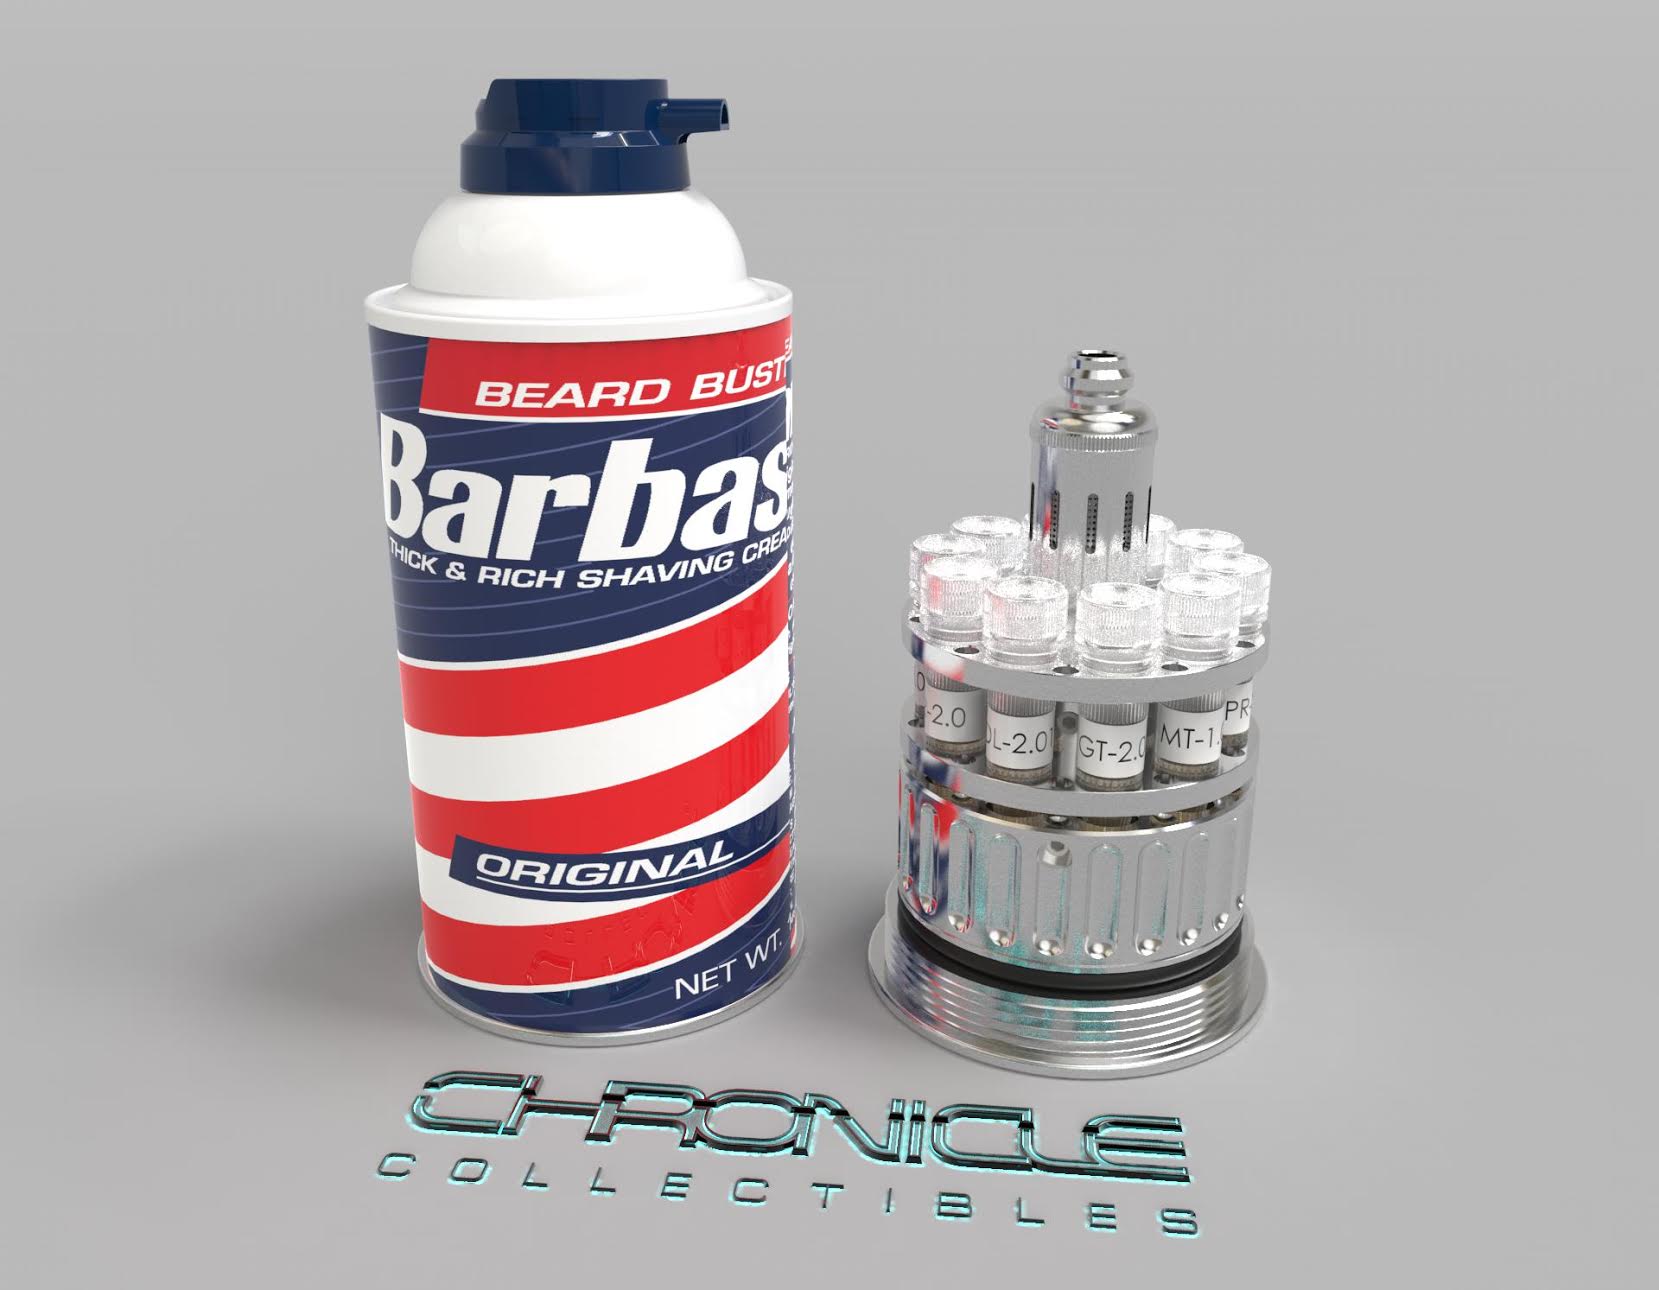 An Official Replica Of The Barbasol Can From Jurassic Park Is Coming Soon